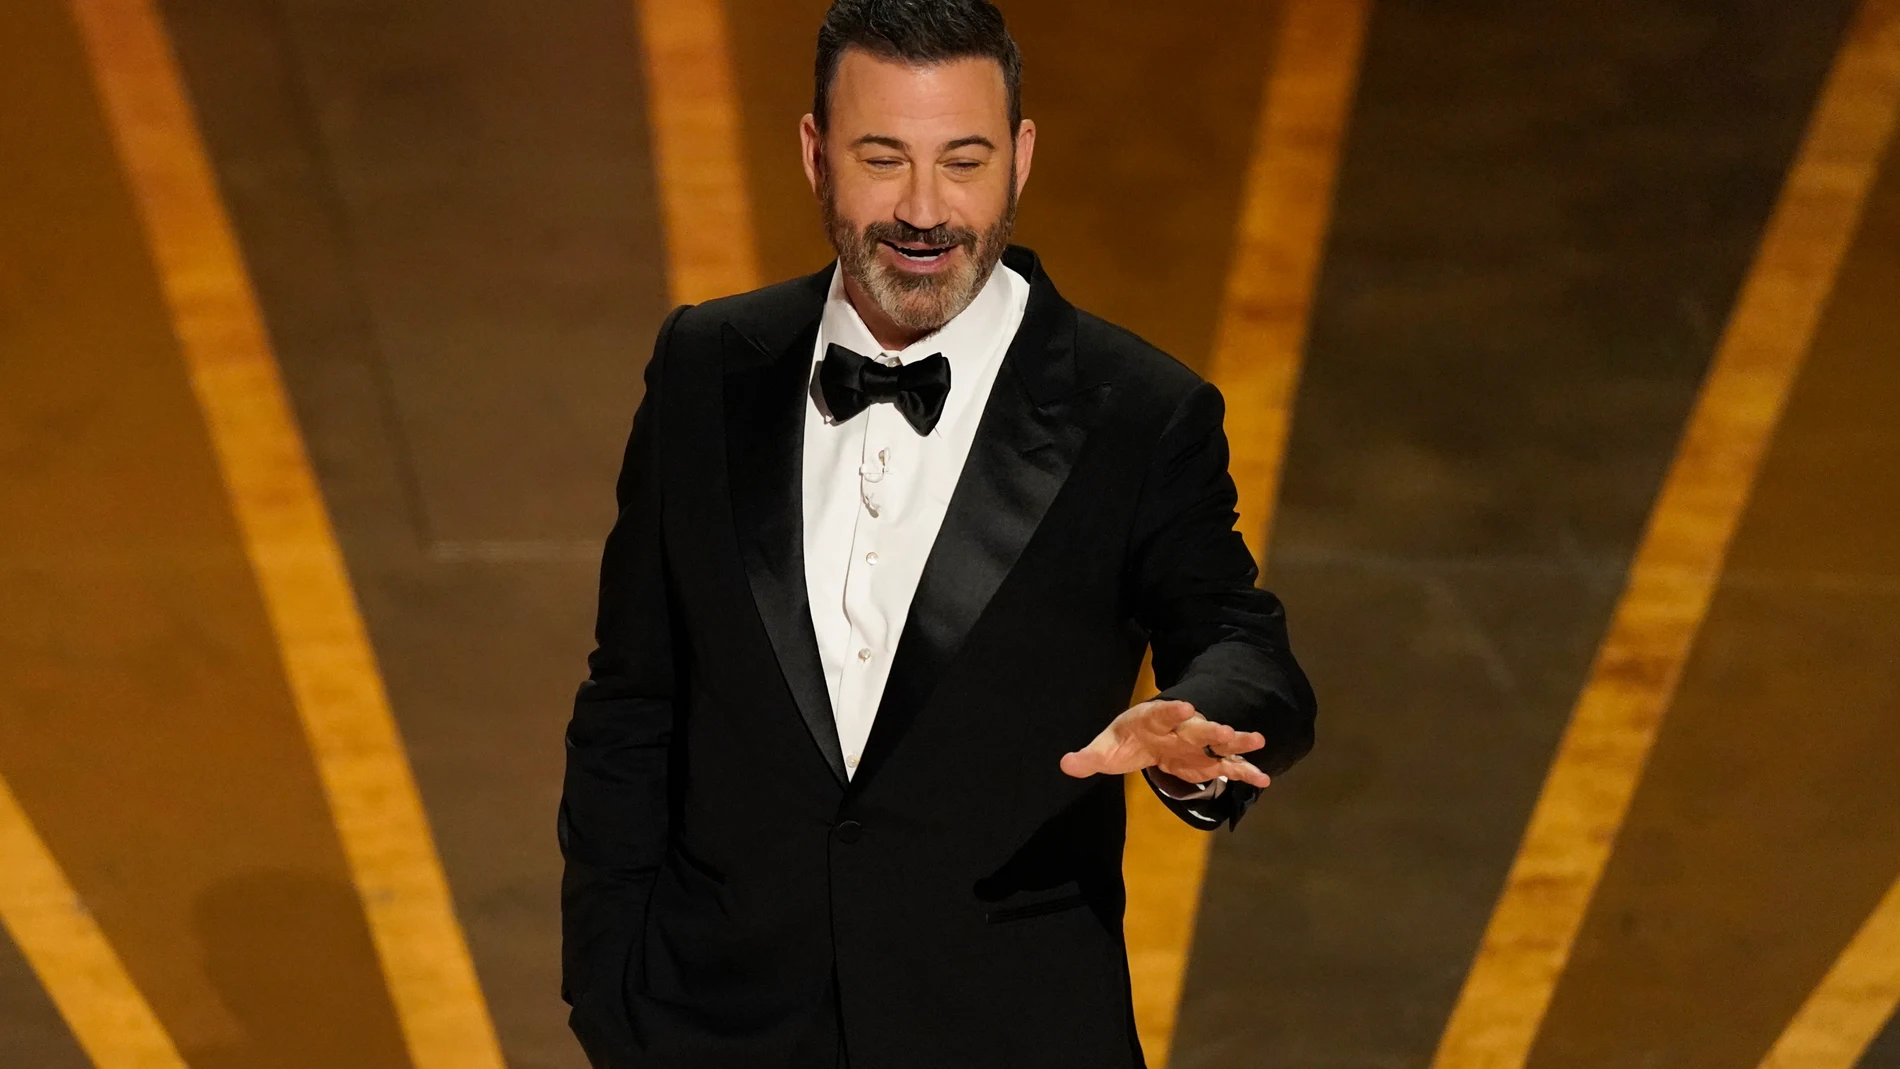 FILE - Host Jimmy Kimmel speaks at the Oscars on March 12, 2023, at the Dolby Theatre in Los Angeles. Kimmel will host the 96th Oscars on Sunday. (AP Photo/Chris Pizzello, File)